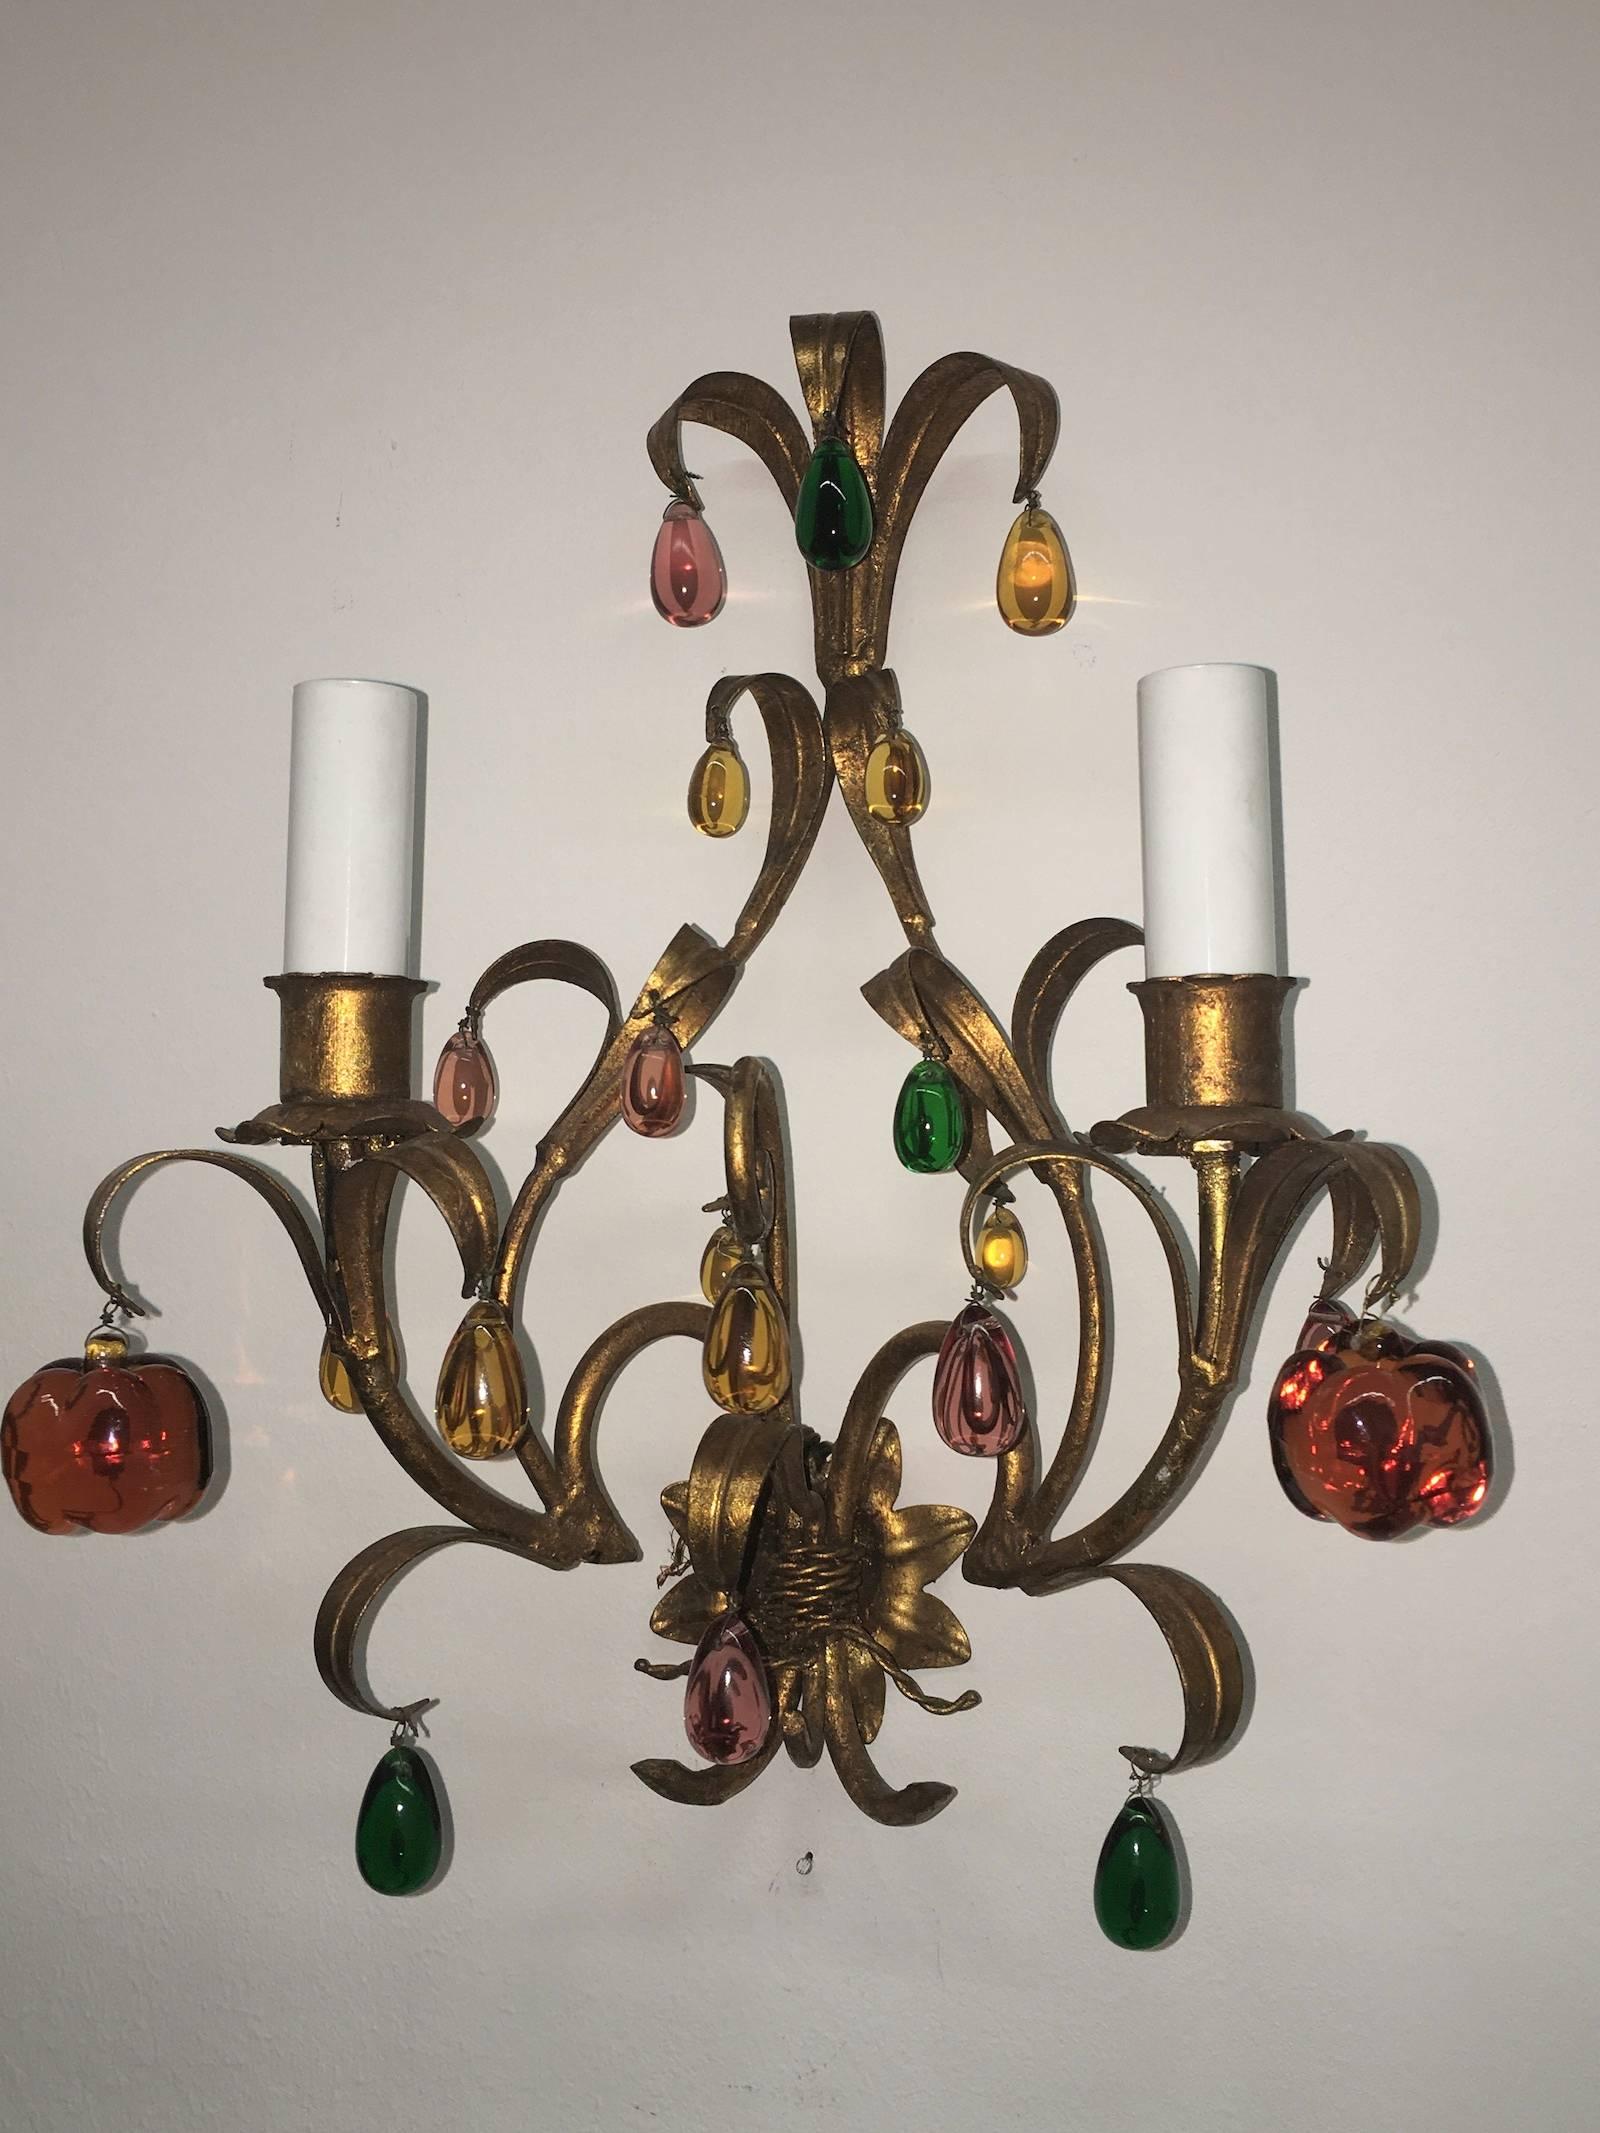 A beautiful pair of Florentine style wall light sconces, made in Italy in the 1960s. Hand-painted metal bases with Murano glass drops and fruits. Each fixture requires two European E14 candelabra bulbs, each bulb up to 40 watts.